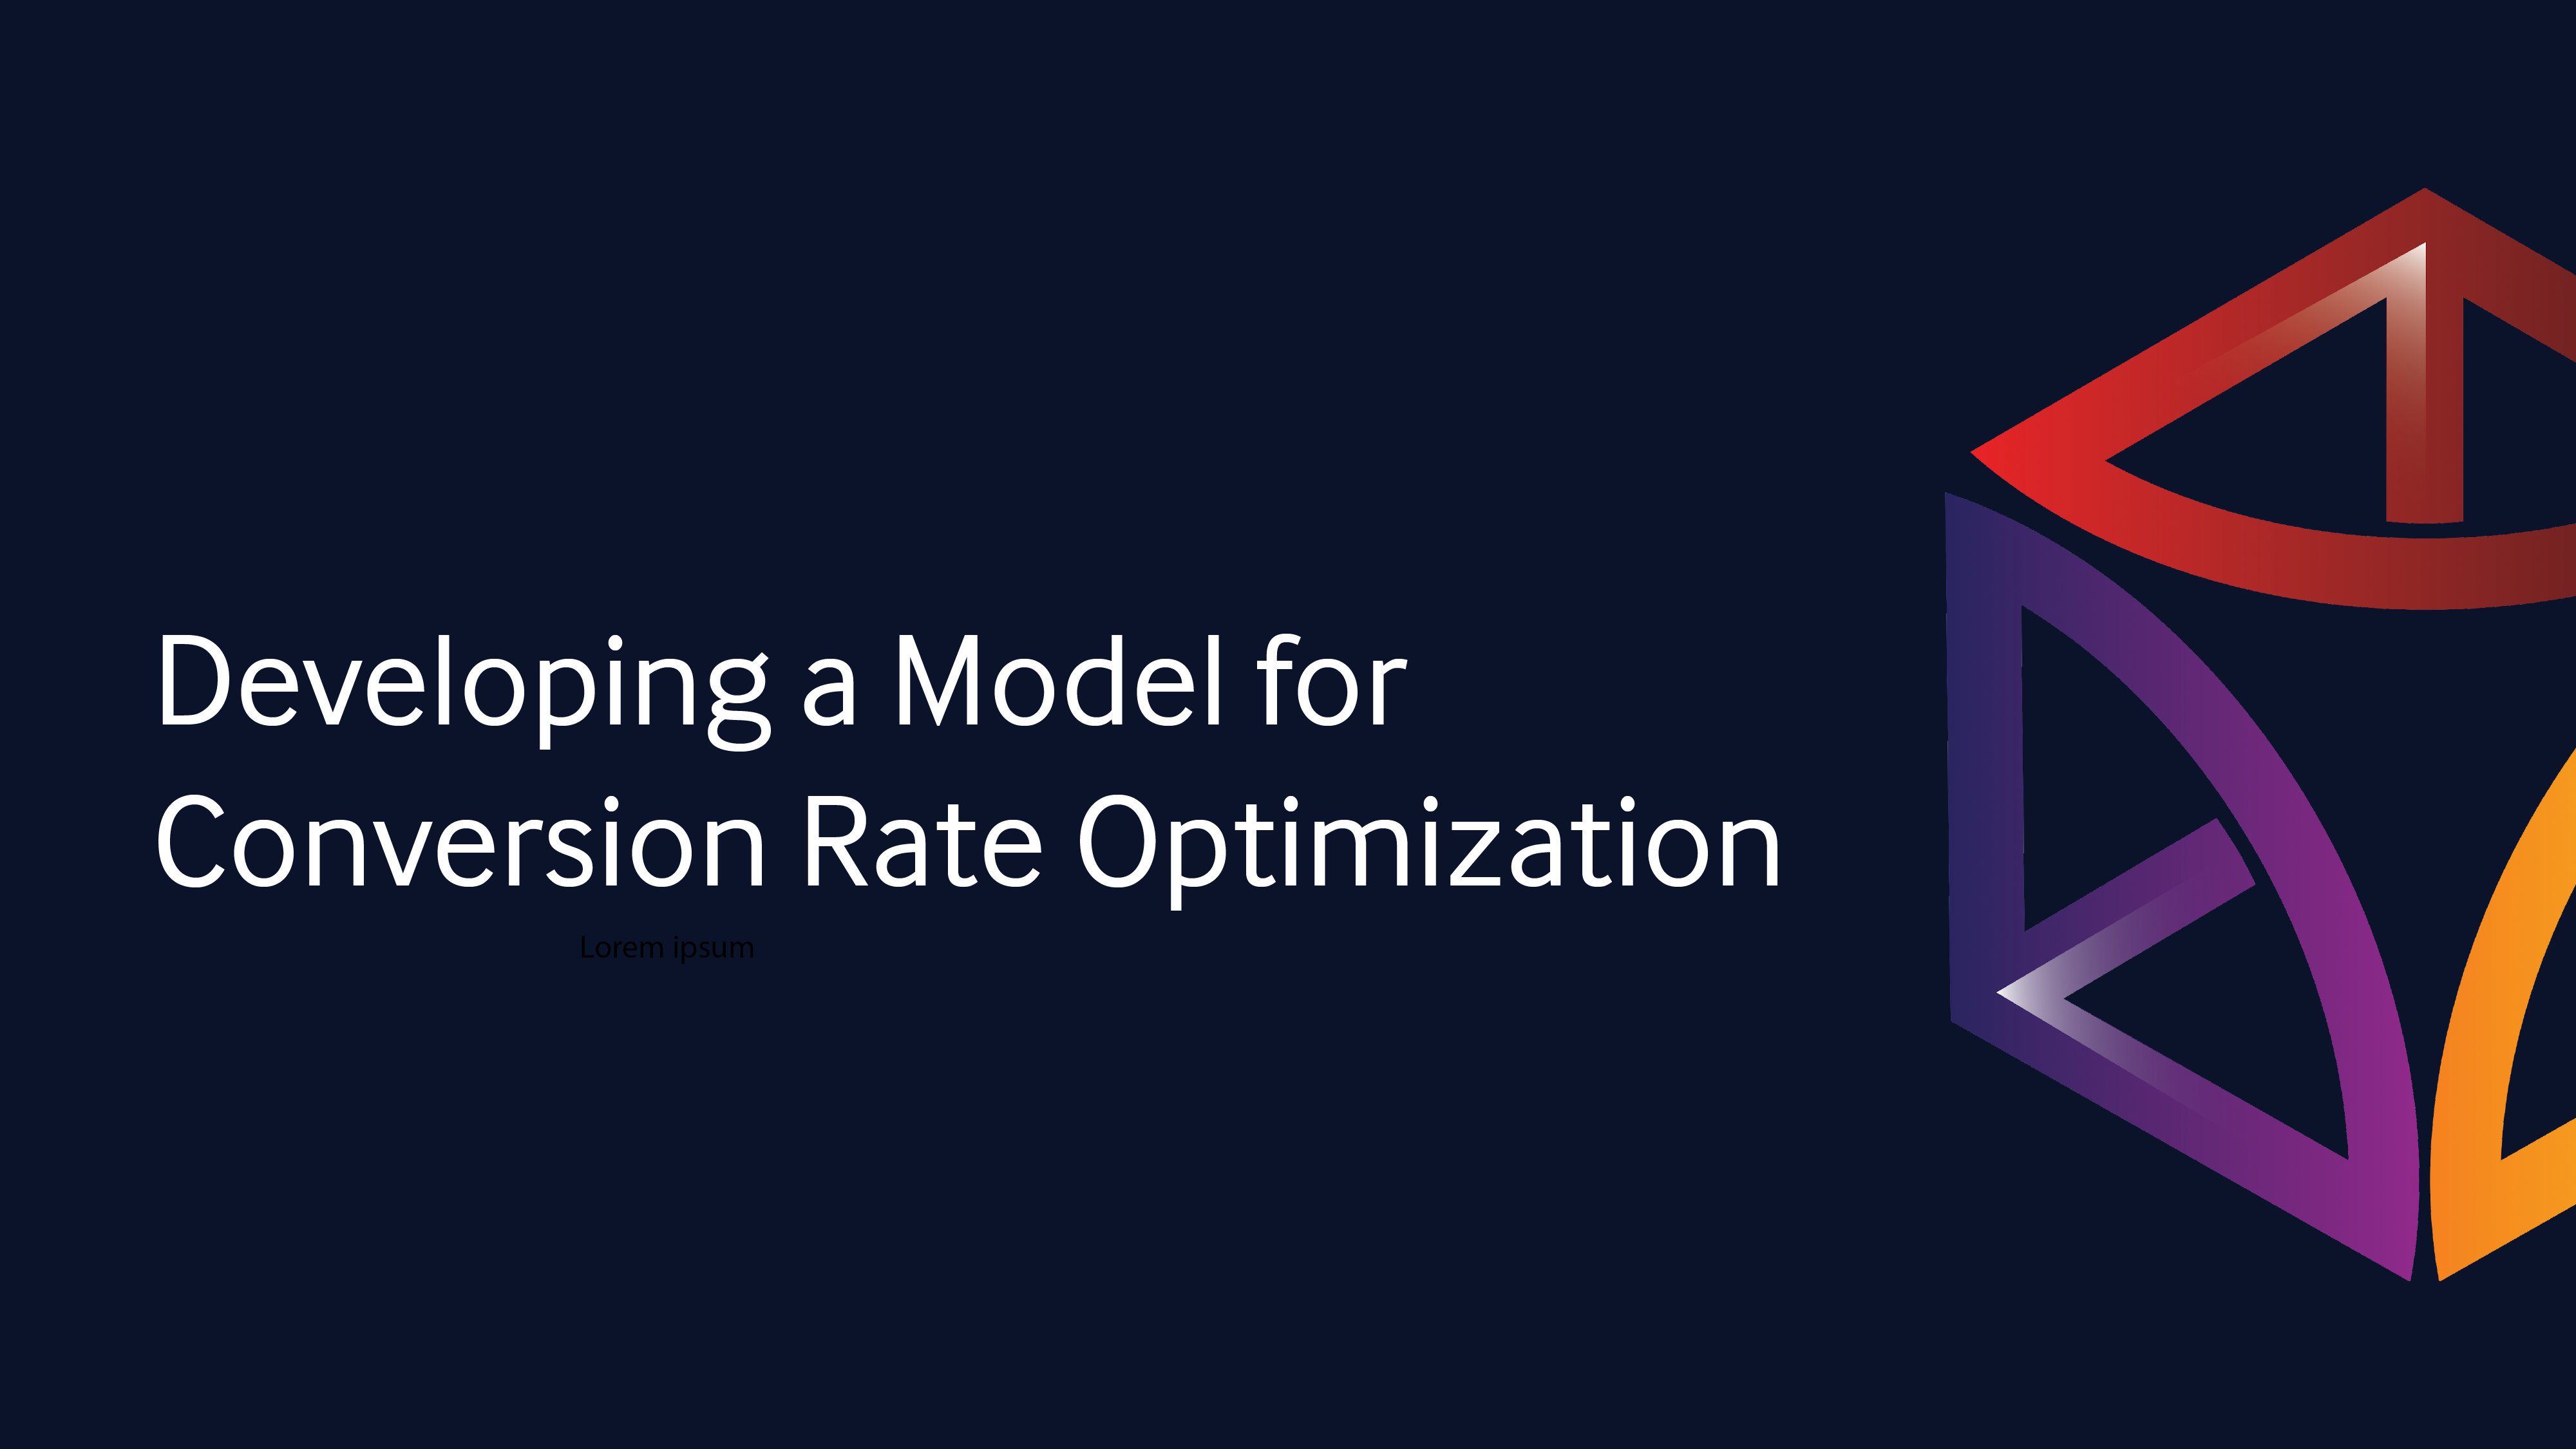 Developing a Model for Conversion Rate Optimization (CRO)